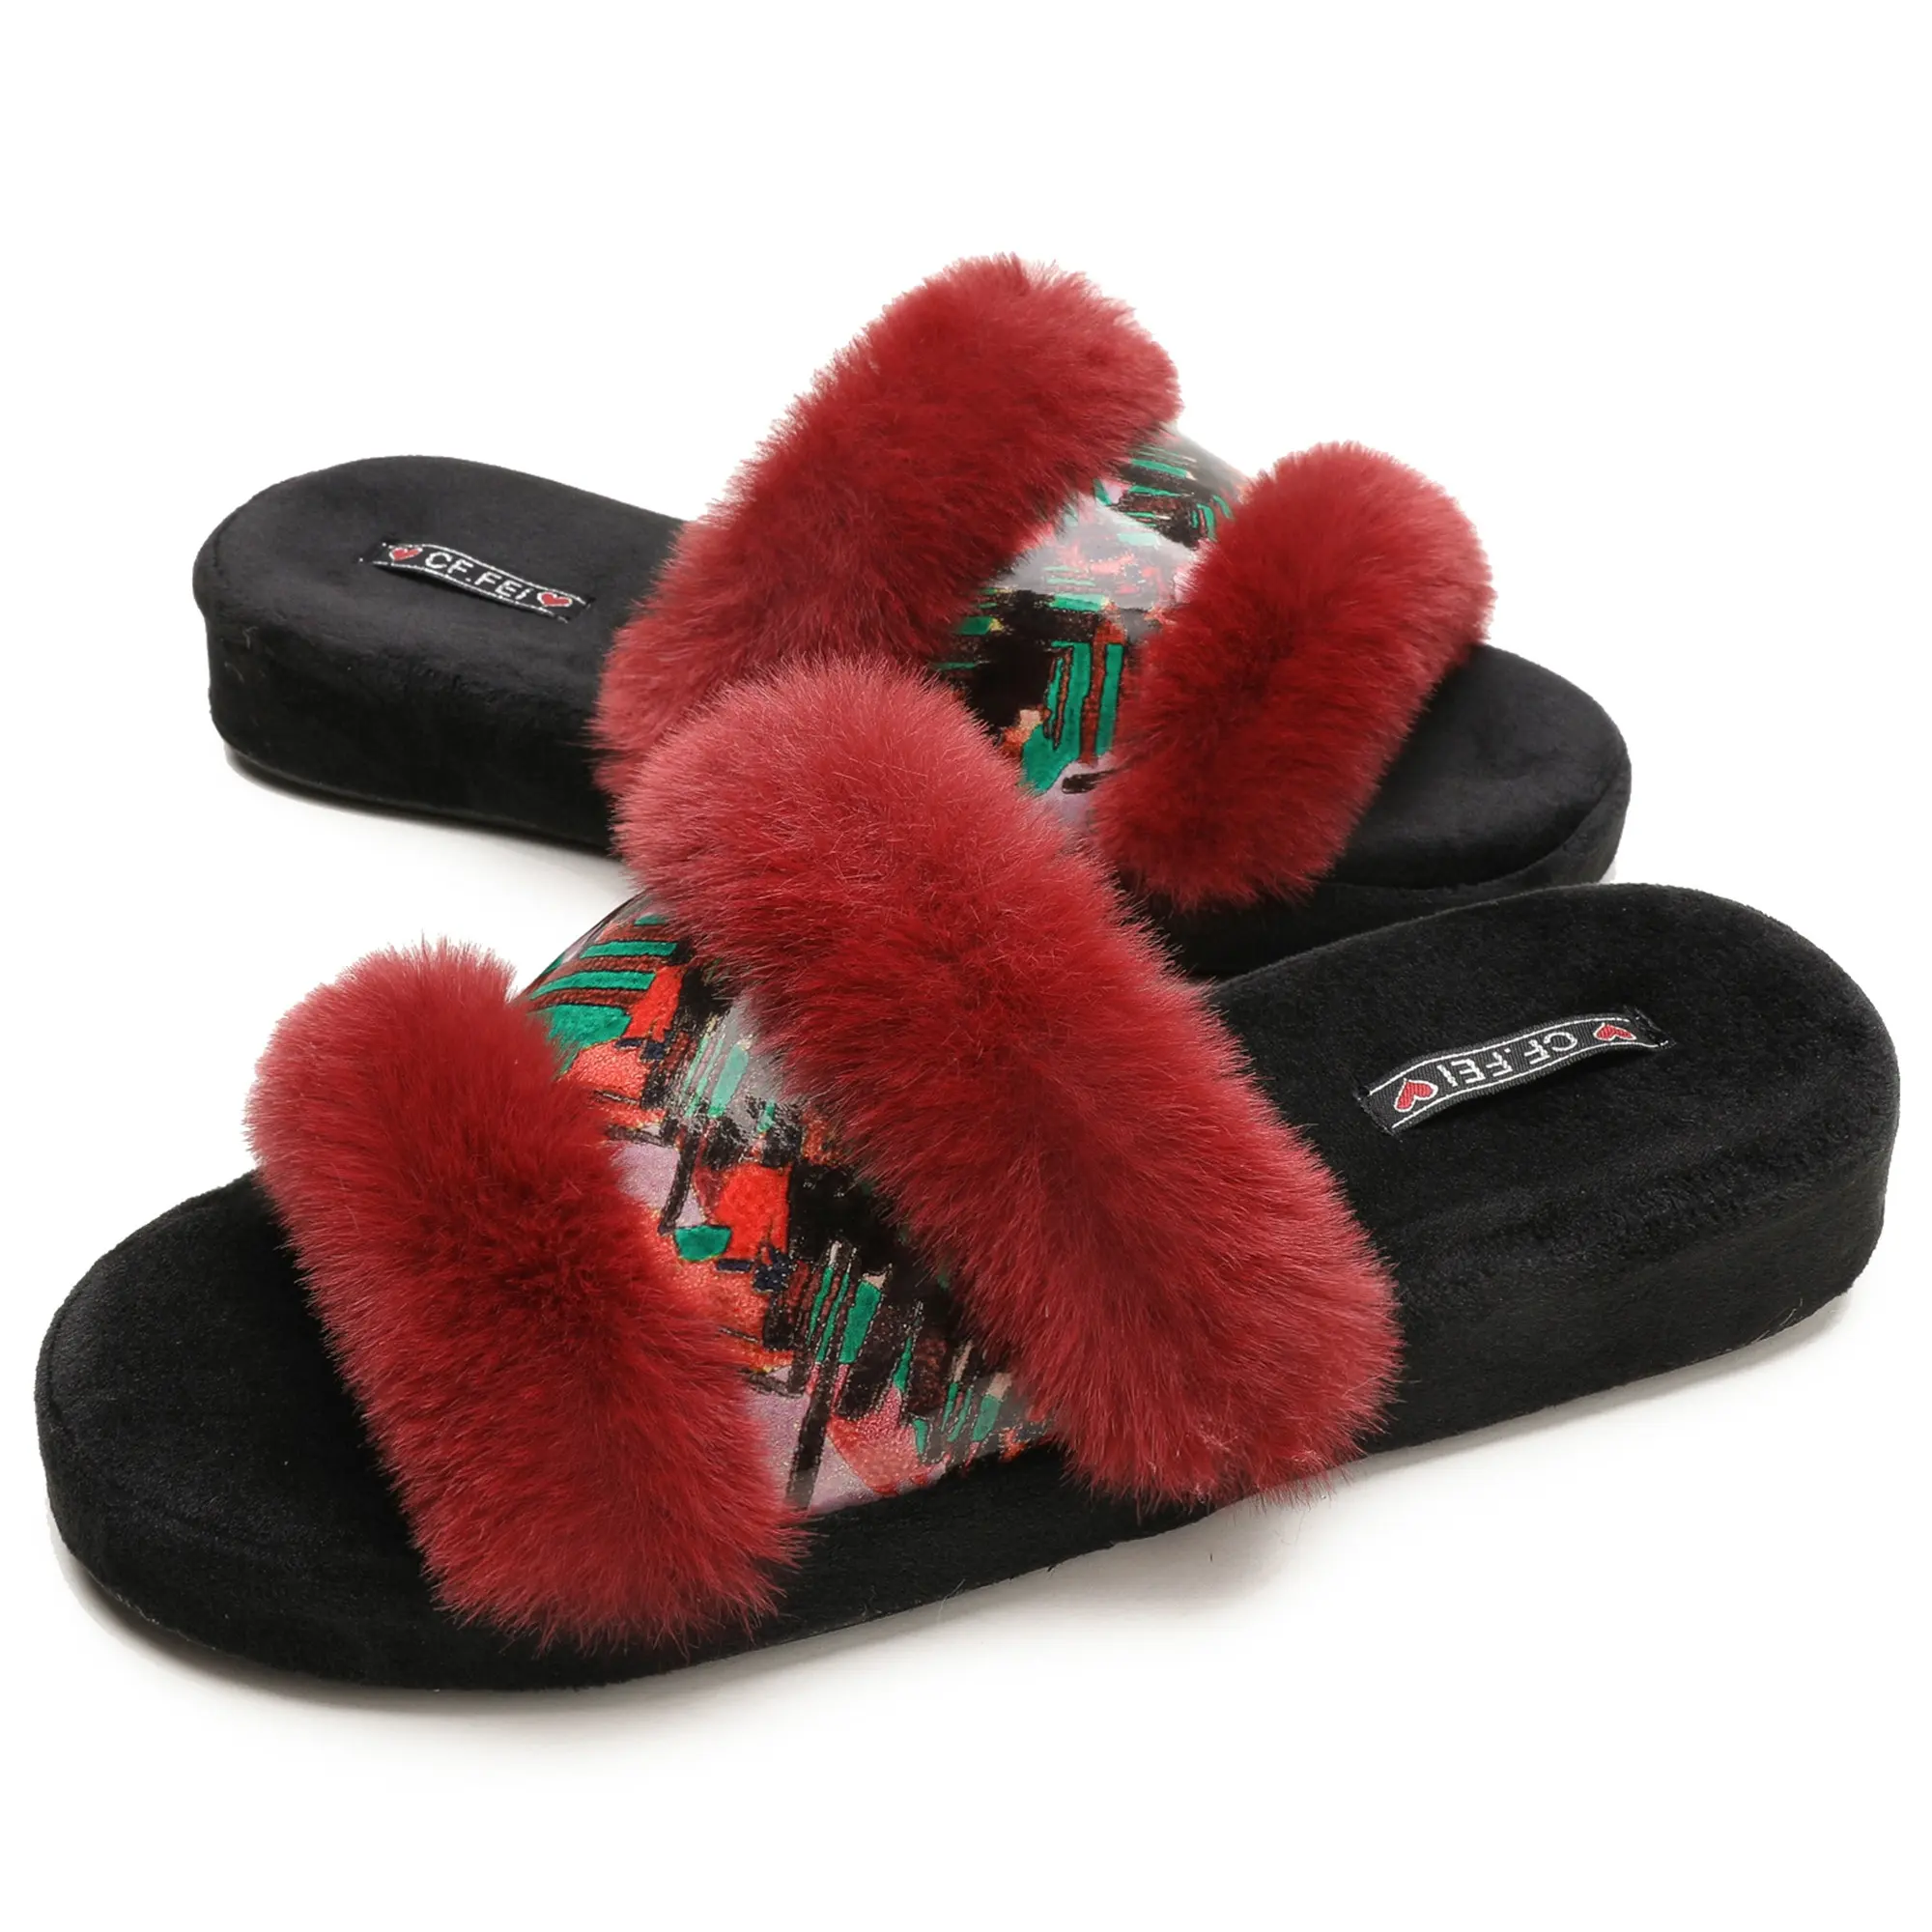 CORIFEI Italian Oil Painting Design Shoes With Arch Support Extra Comfort Furry Cotton Slippers